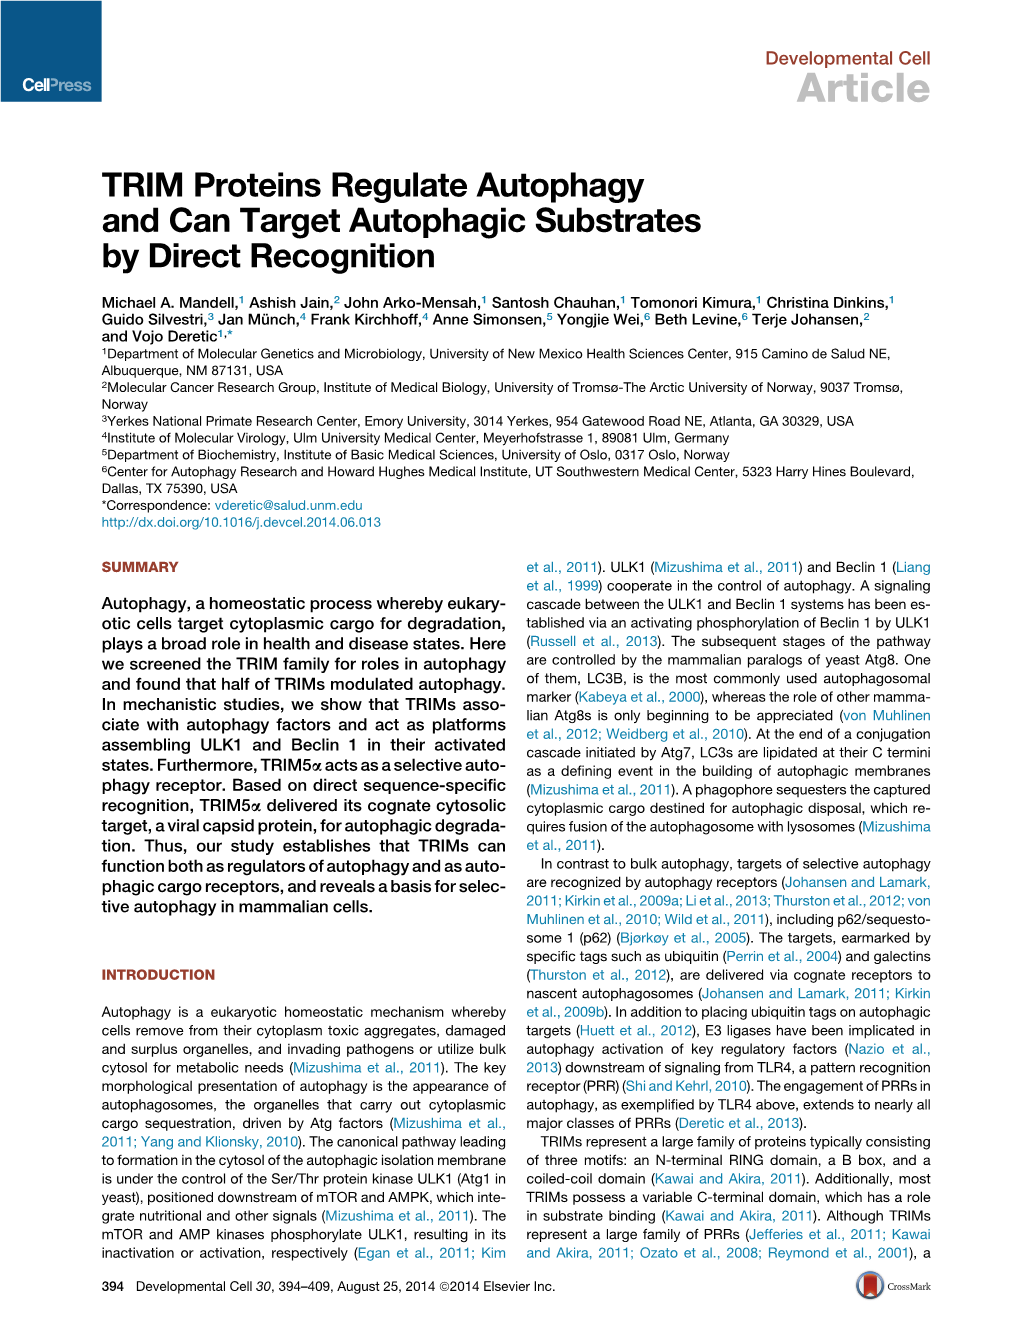 TRIM Proteins Regulate Autophagy and Can Target Autophagic Substrates by Direct Recognition